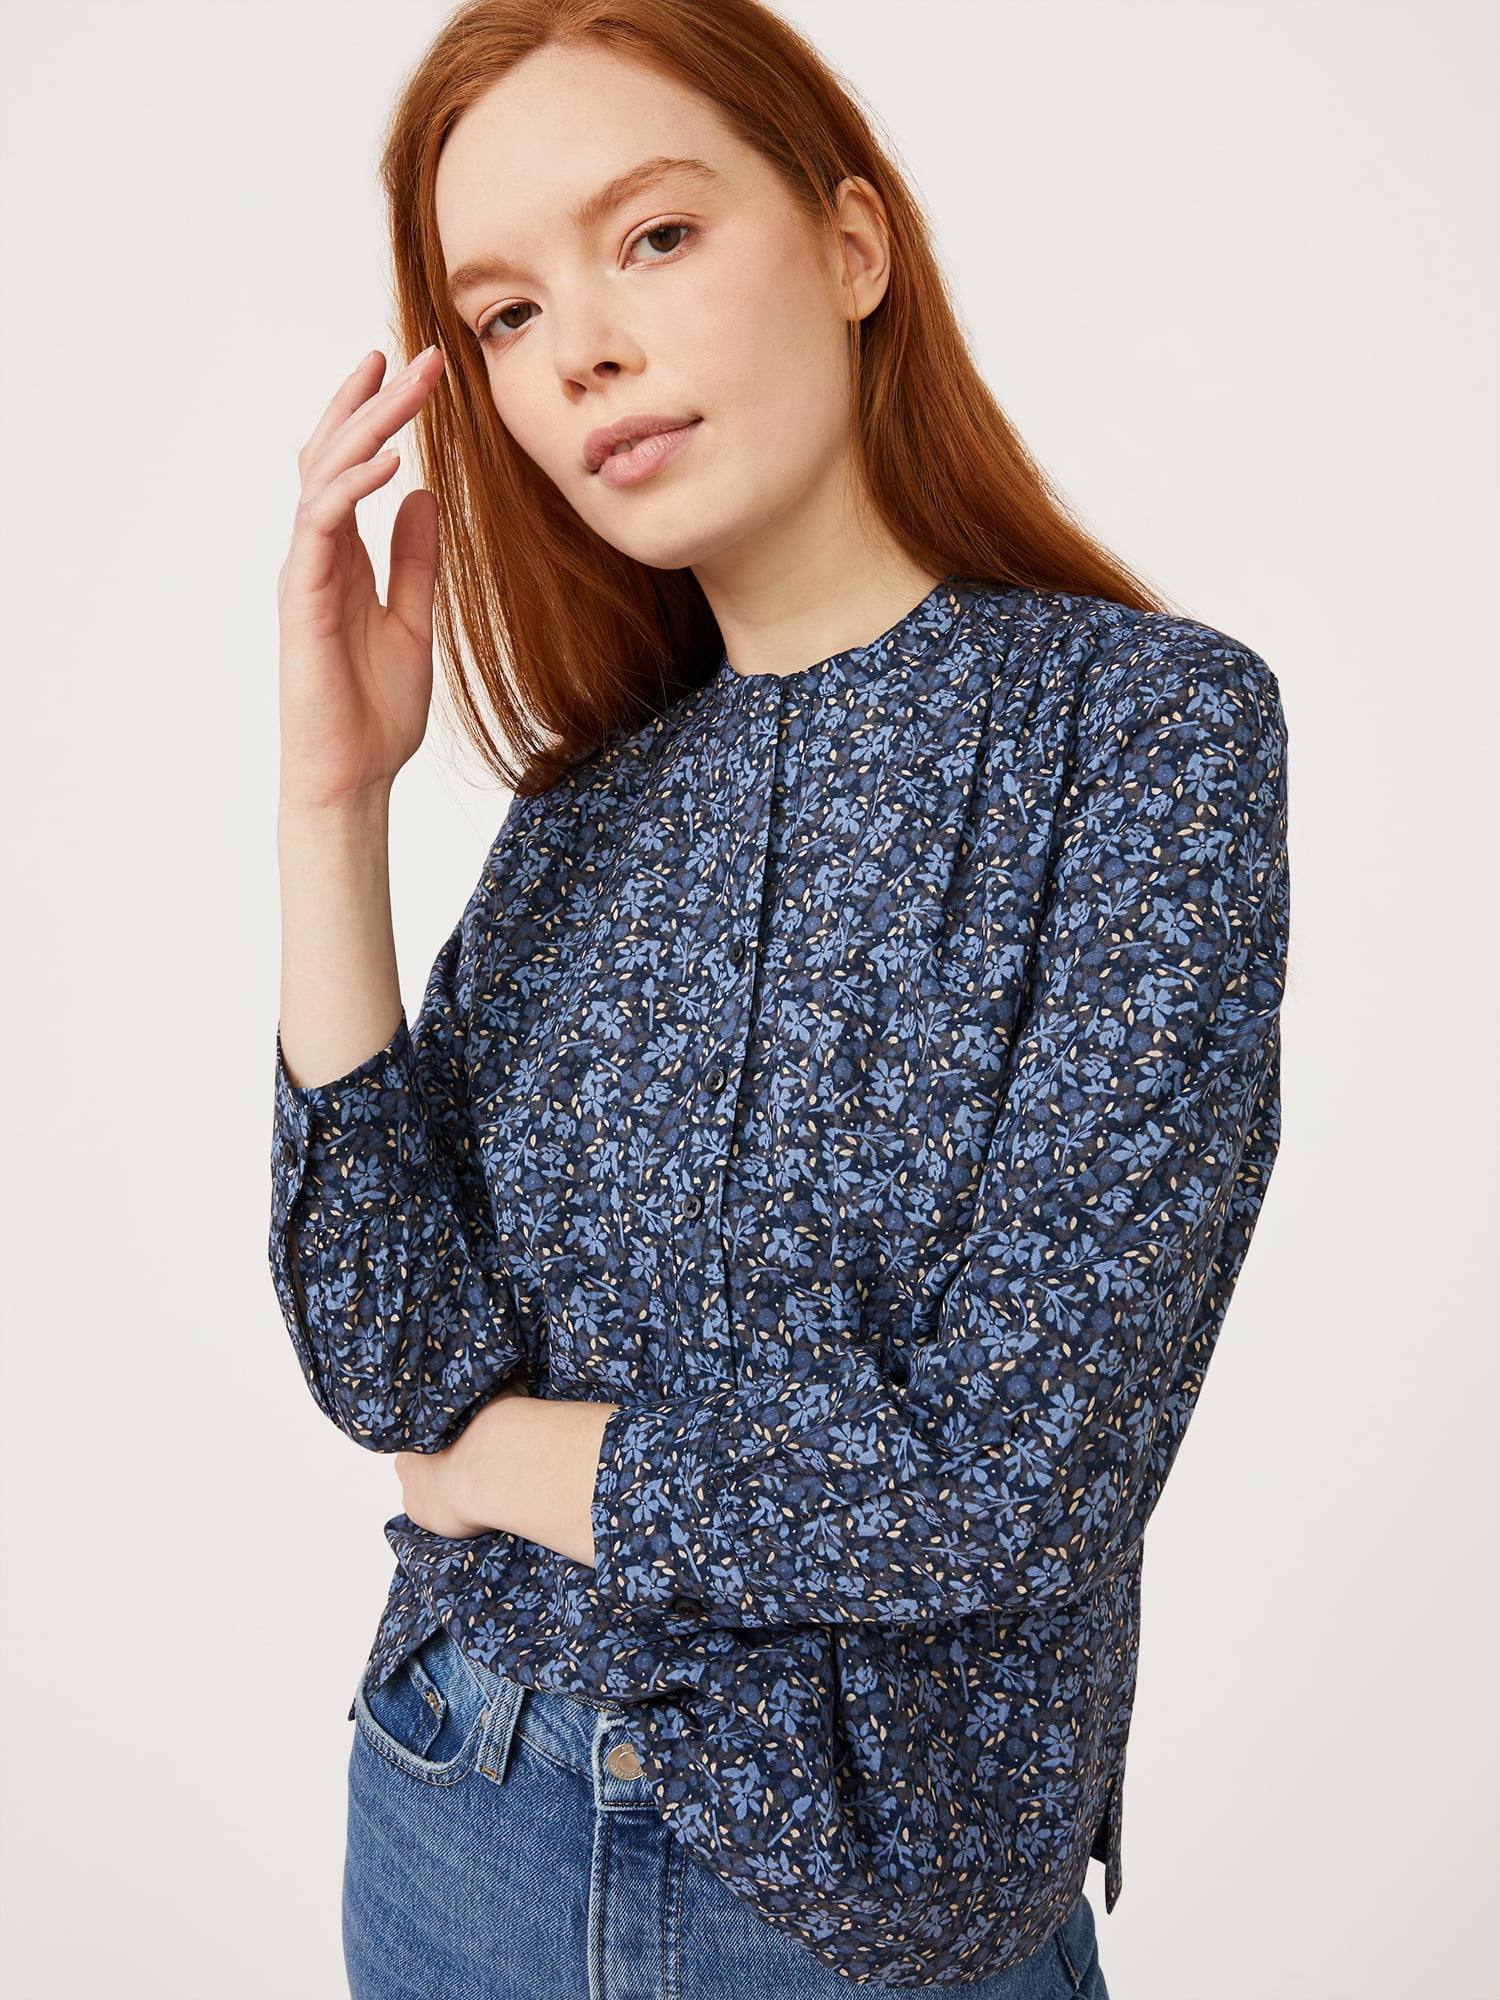 Free Assembly Women's Shirred Popover Top with Long Sleeves - Walmart.com